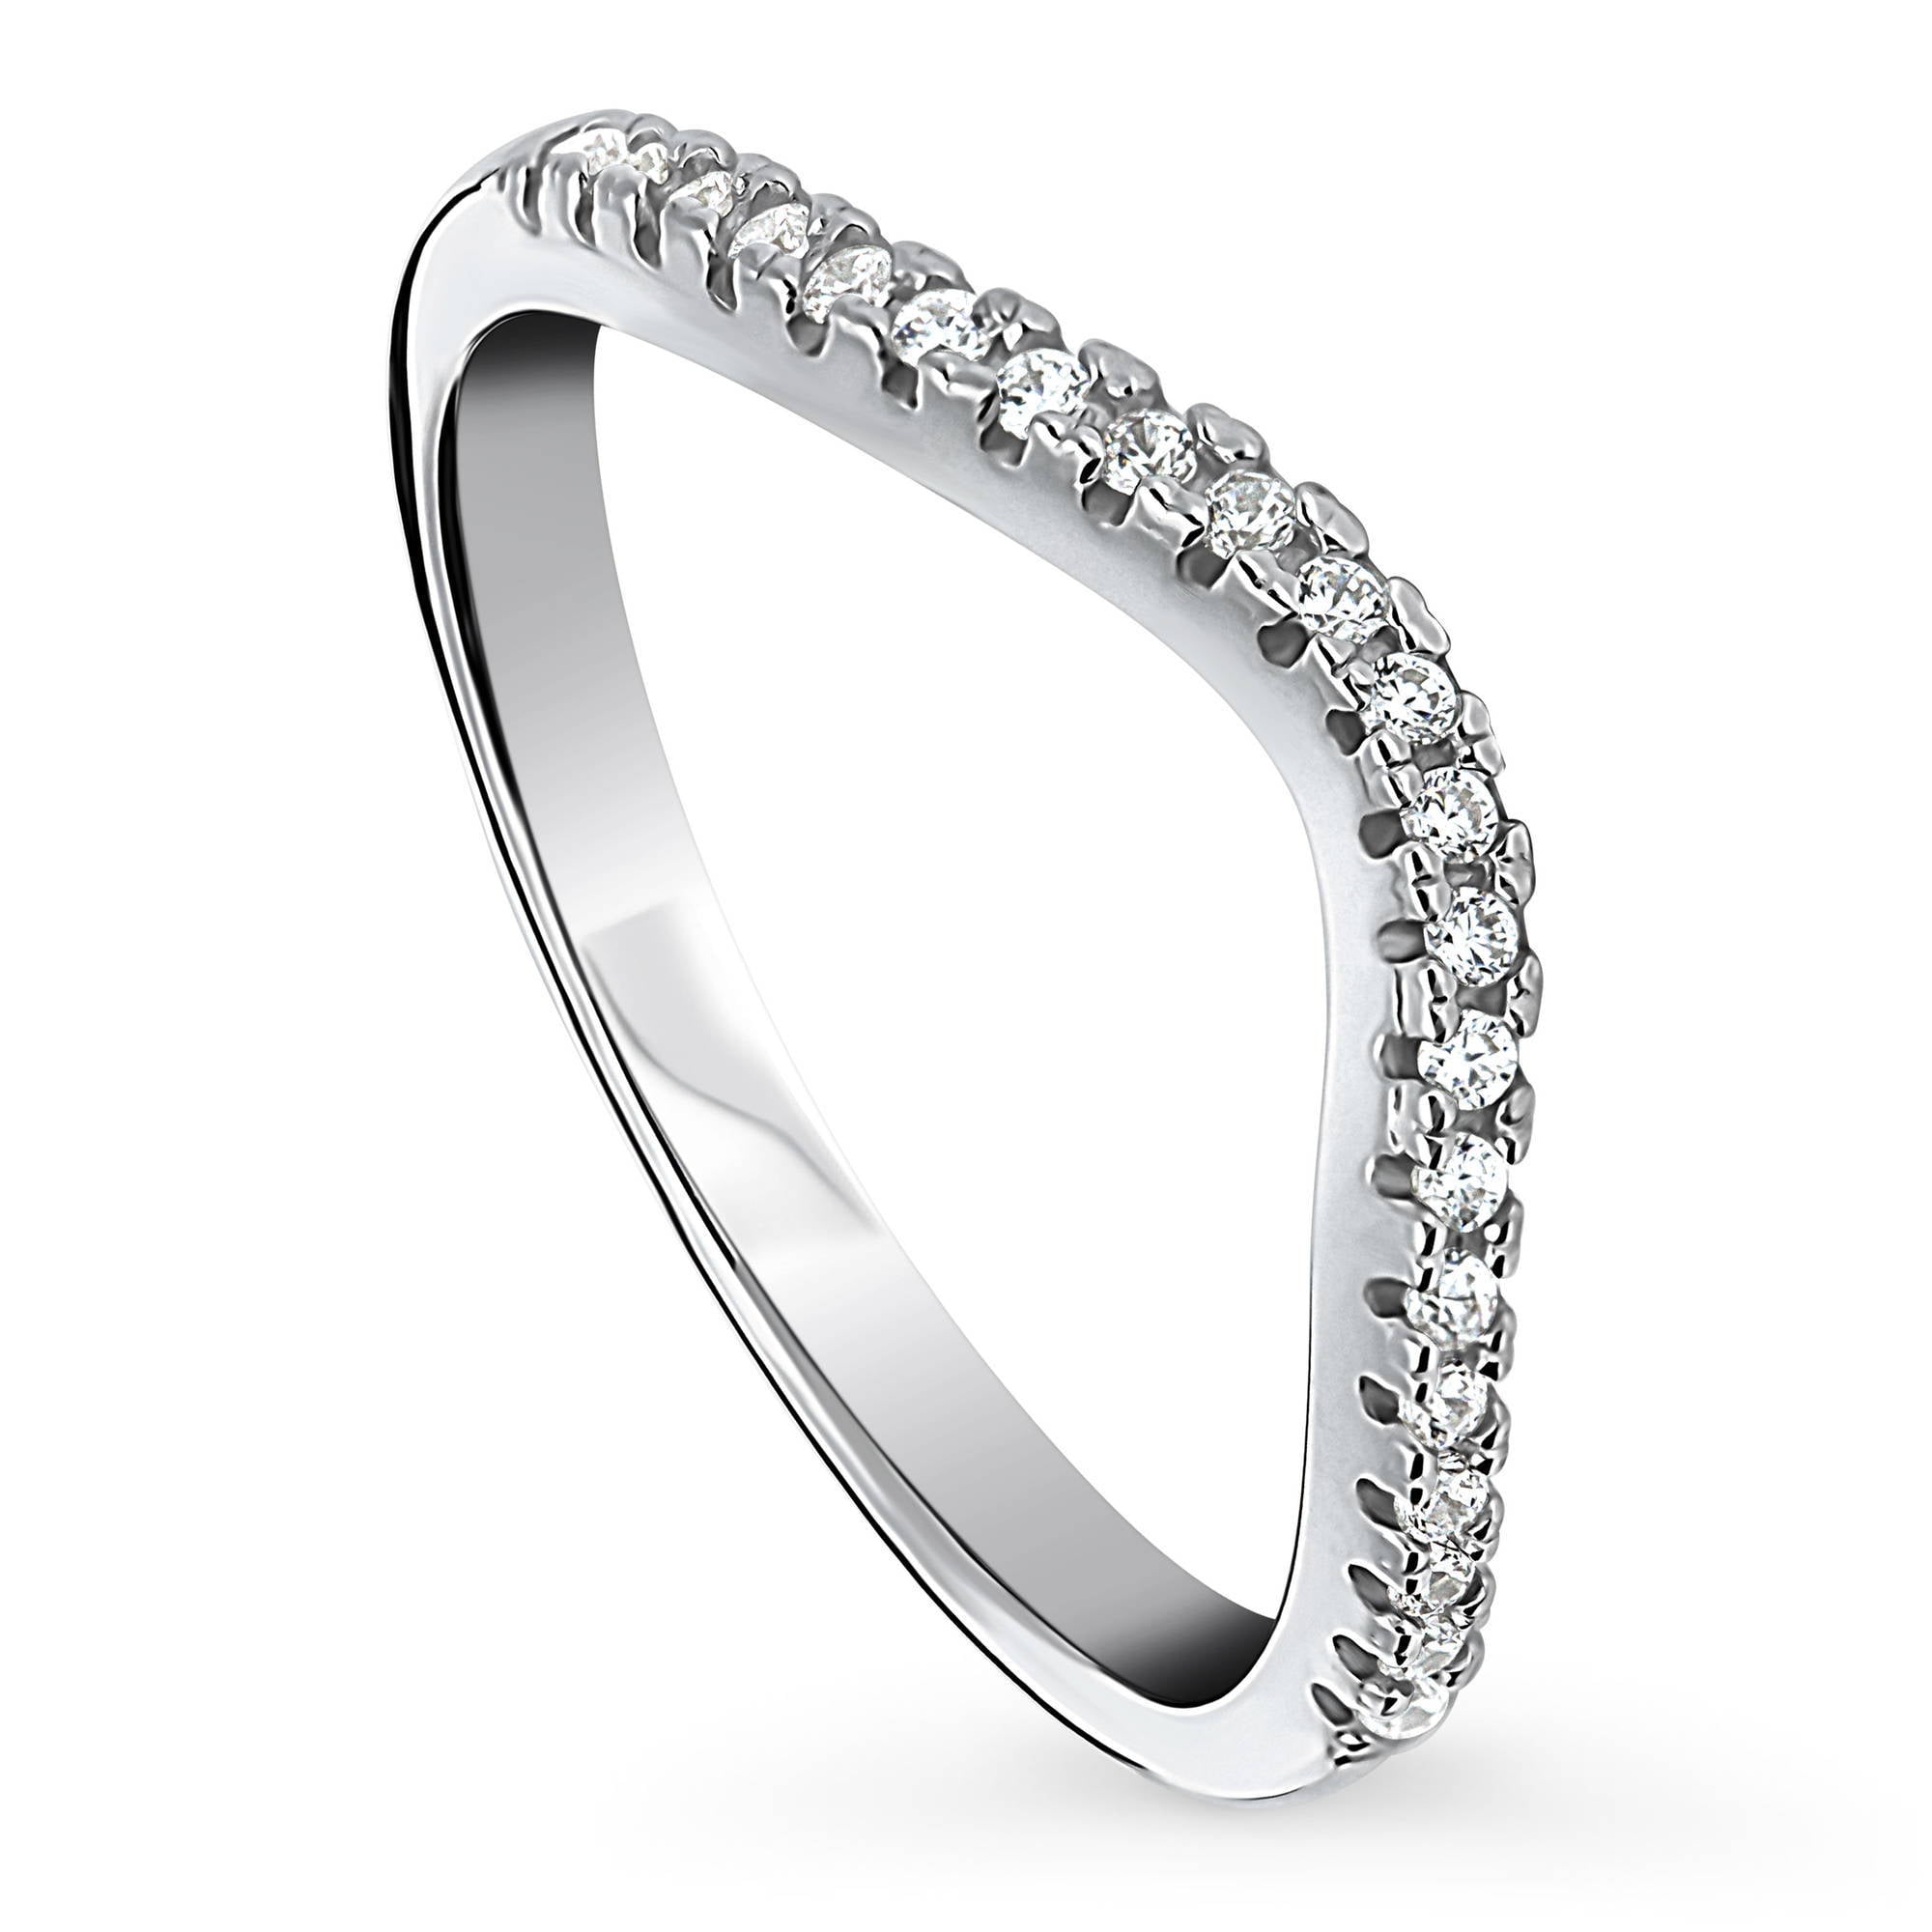 BERRICLE Sterling Silver Cubic Zirconia Wedding Curved Half Eternity Band Ring 